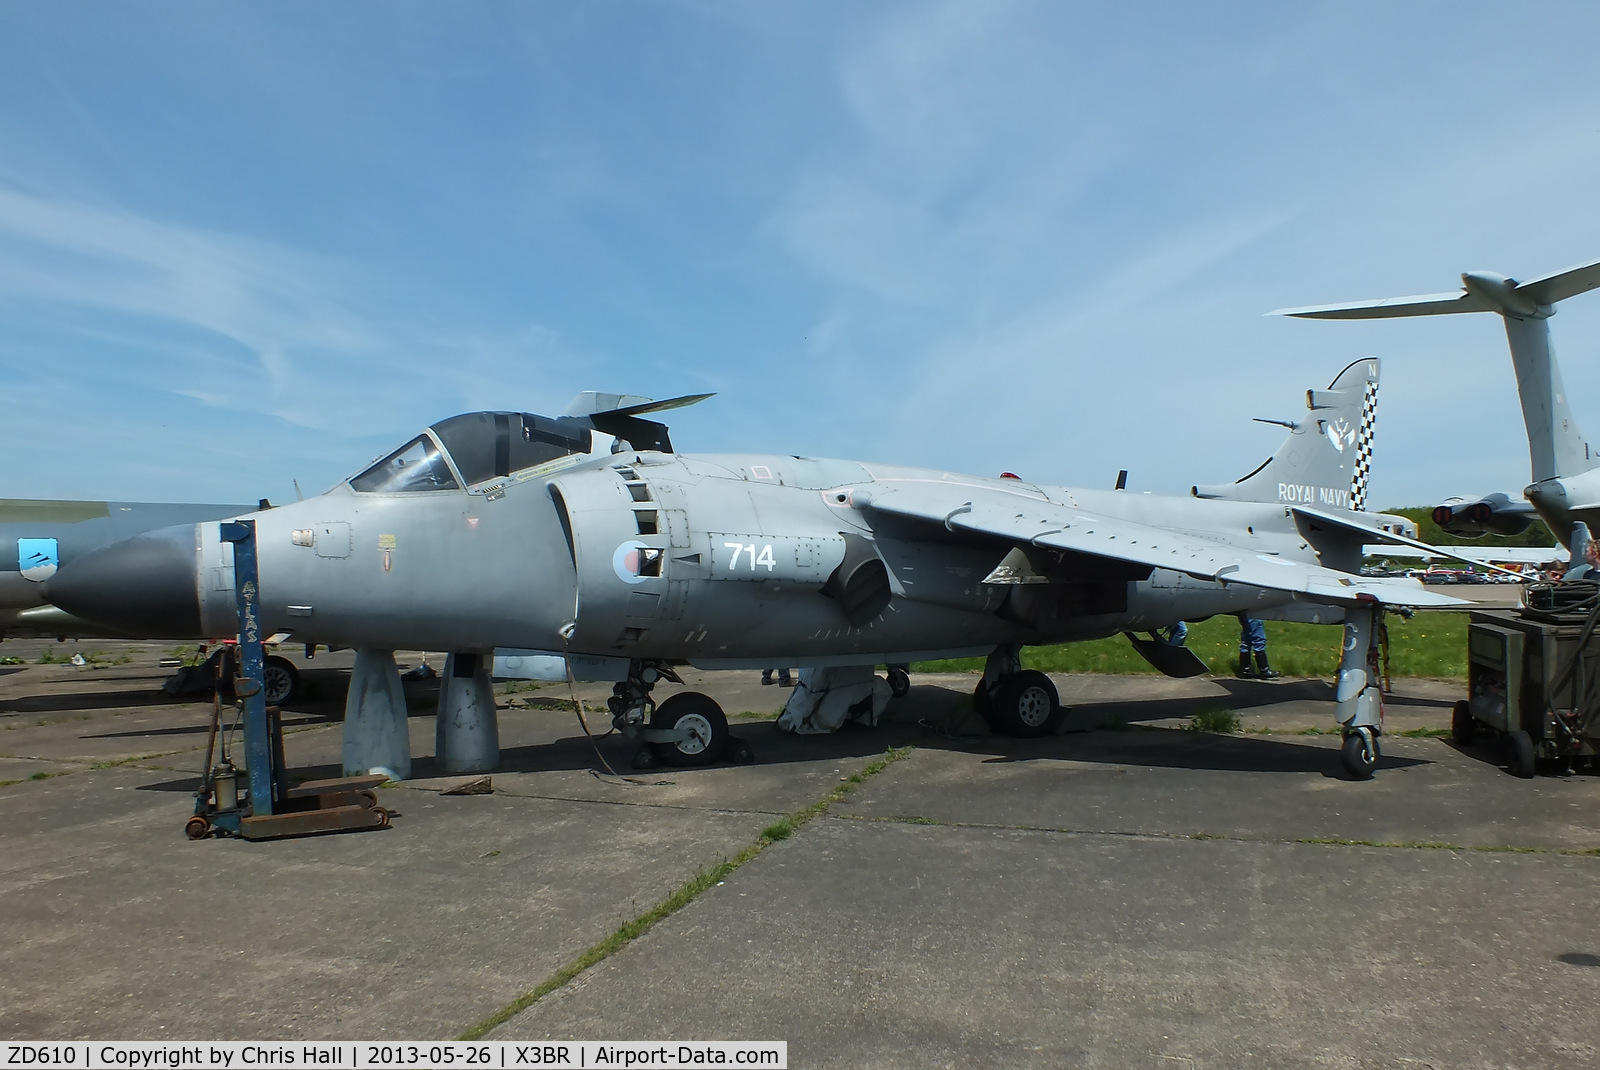 ZD610, 1985 British Aerospace Sea Harrier F/A.2 C/N 1H-912049/B43/P27, at the Cold War Jets open day, Bruntingthorpe